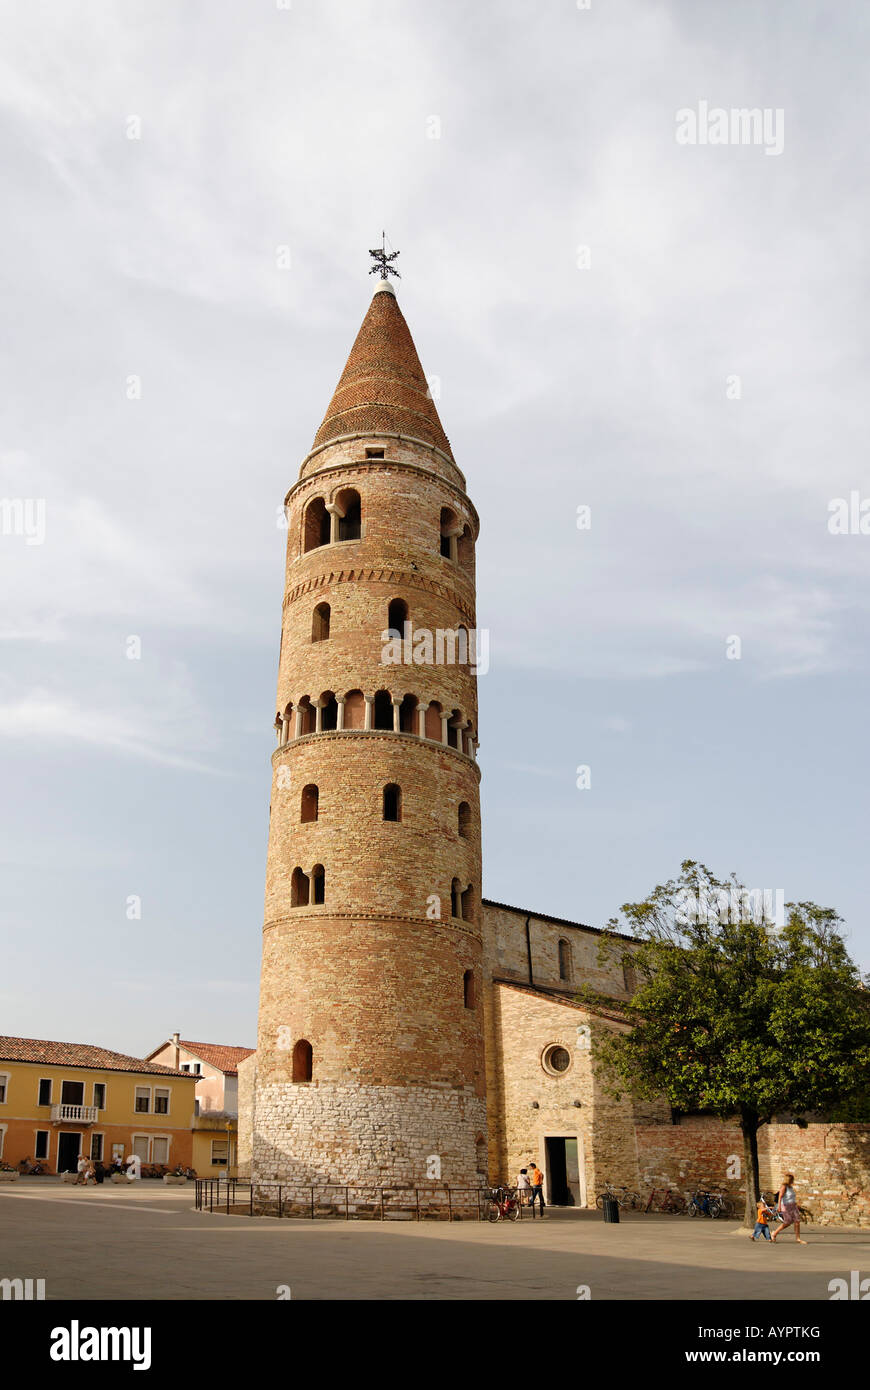 Cathedral and church tower, Caorle, Adriatic region, Veneto, Italy Stock Photo